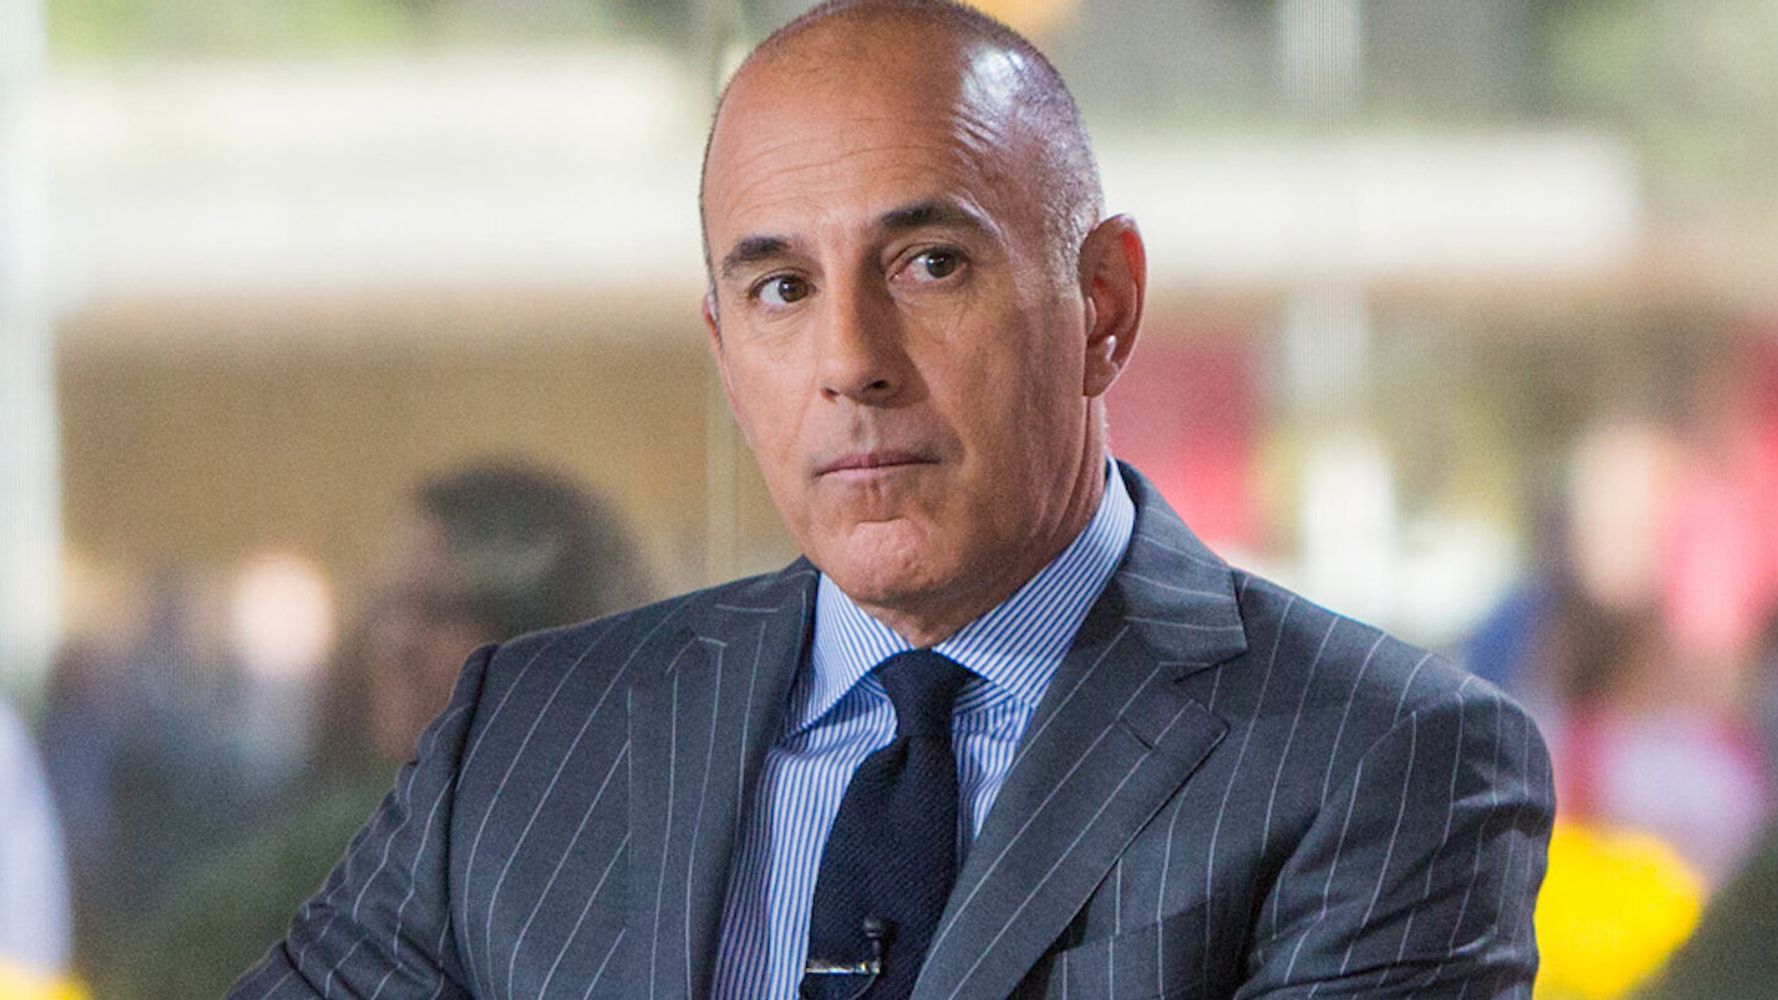 former-today-show-host-matt-lauer-accused-of-rape-huffpost-videos